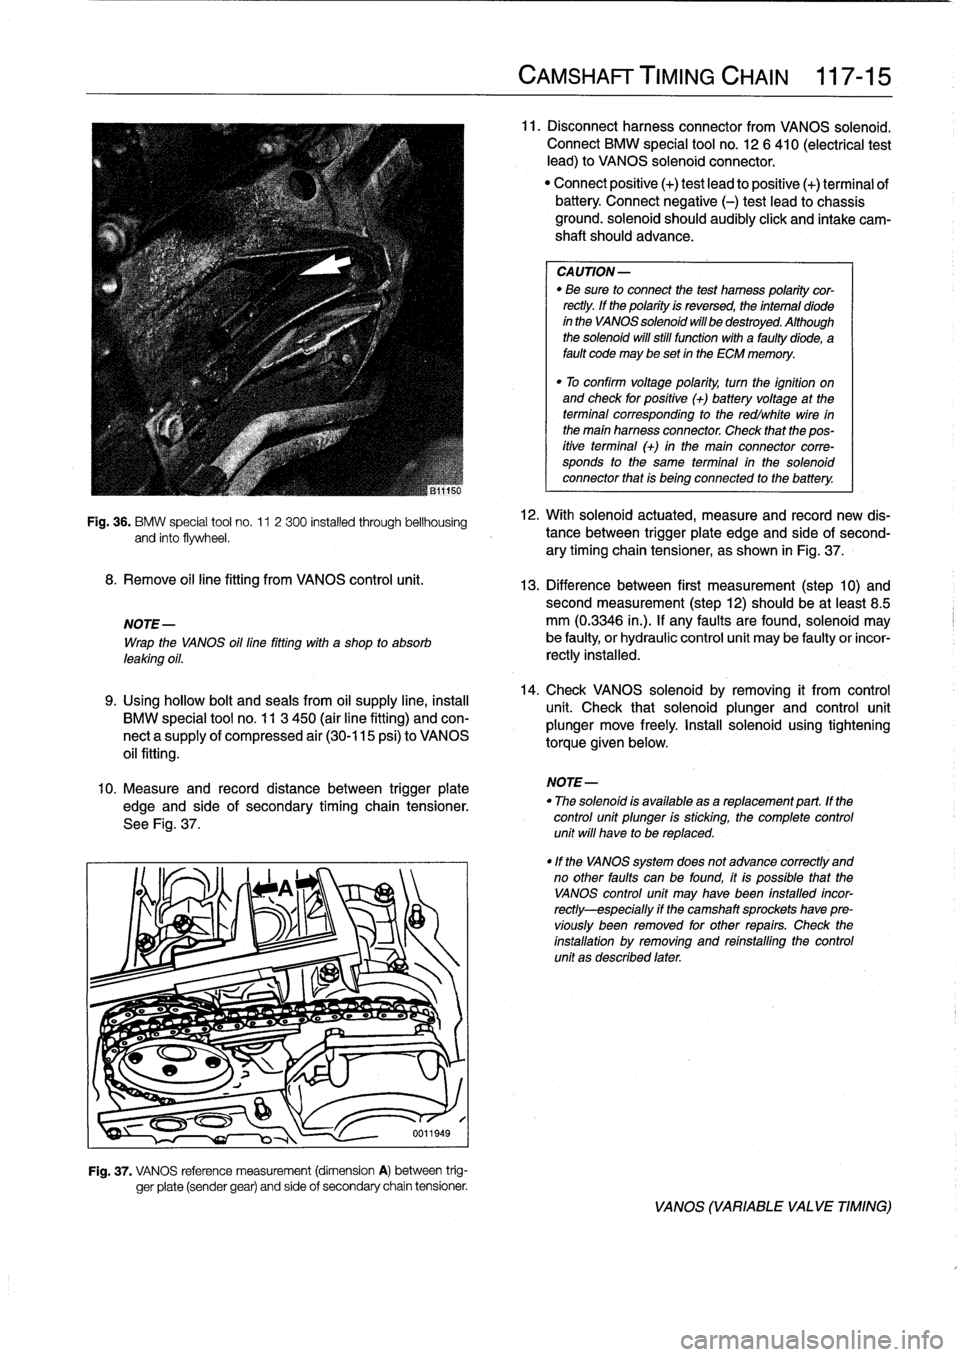 BMW 328i 1995 E36 Workshop Manual 
Fig
.
36
.
BMW
special
tool
no
.
11
2
300
installed
through
bellhousing
and
finto
flywheel
.

8
.
Remove
oil
line
fitting
from
VANOS
control
unit
.

NOTE-

Wrap
the
VANOS
oil
line
fitting
with
a
shop